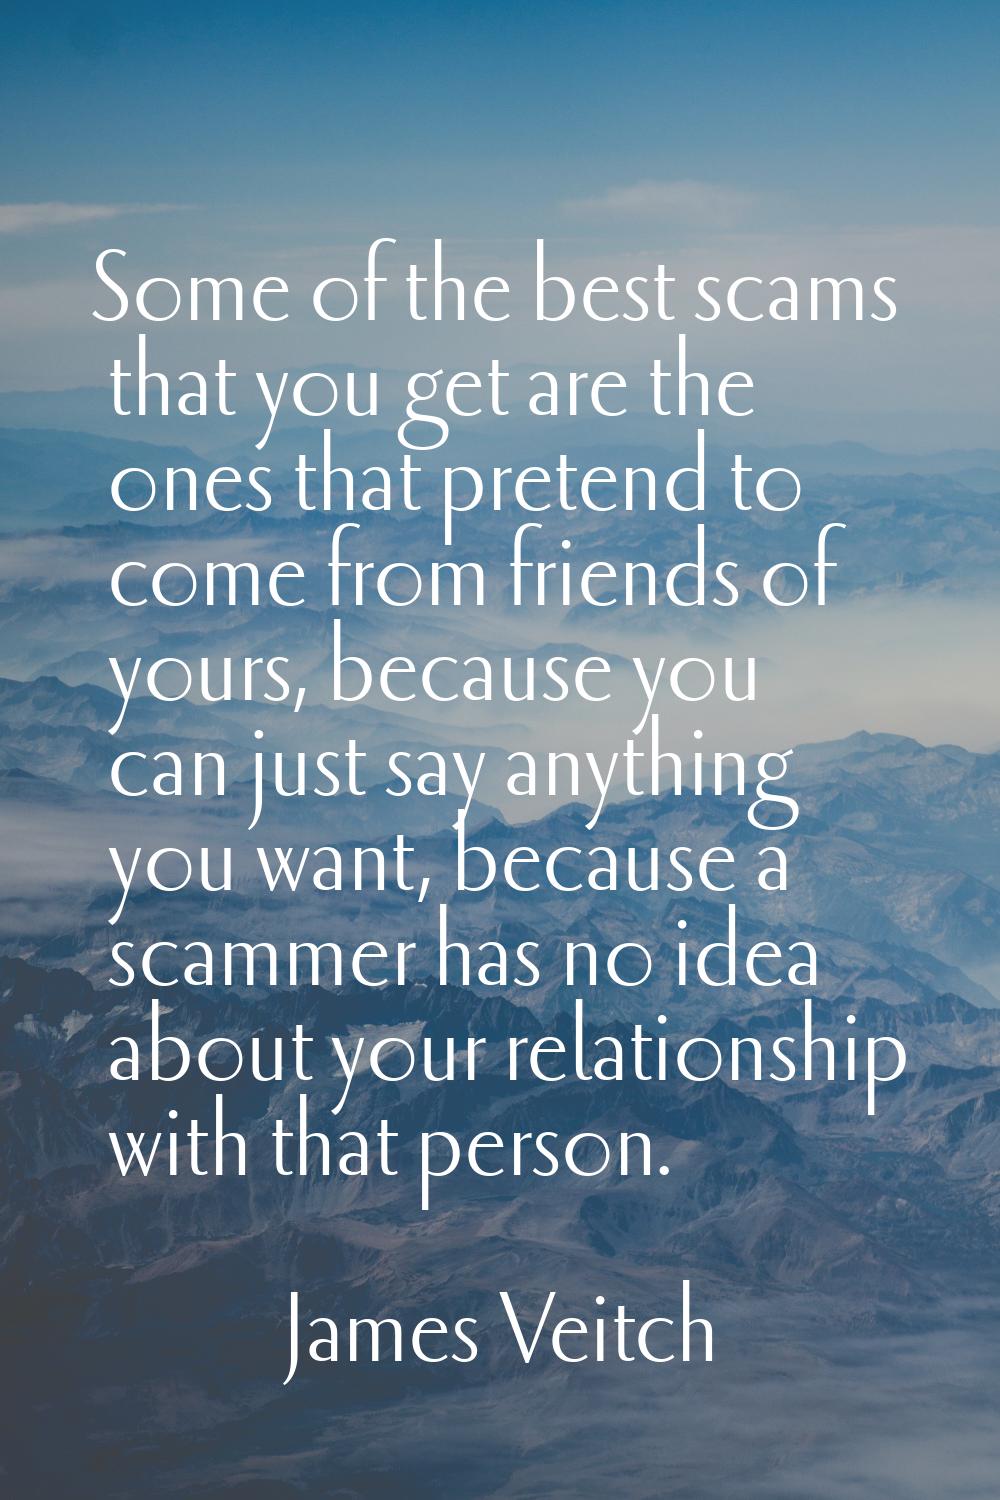 Some of the best scams that you get are the ones that pretend to come from friends of yours, becaus